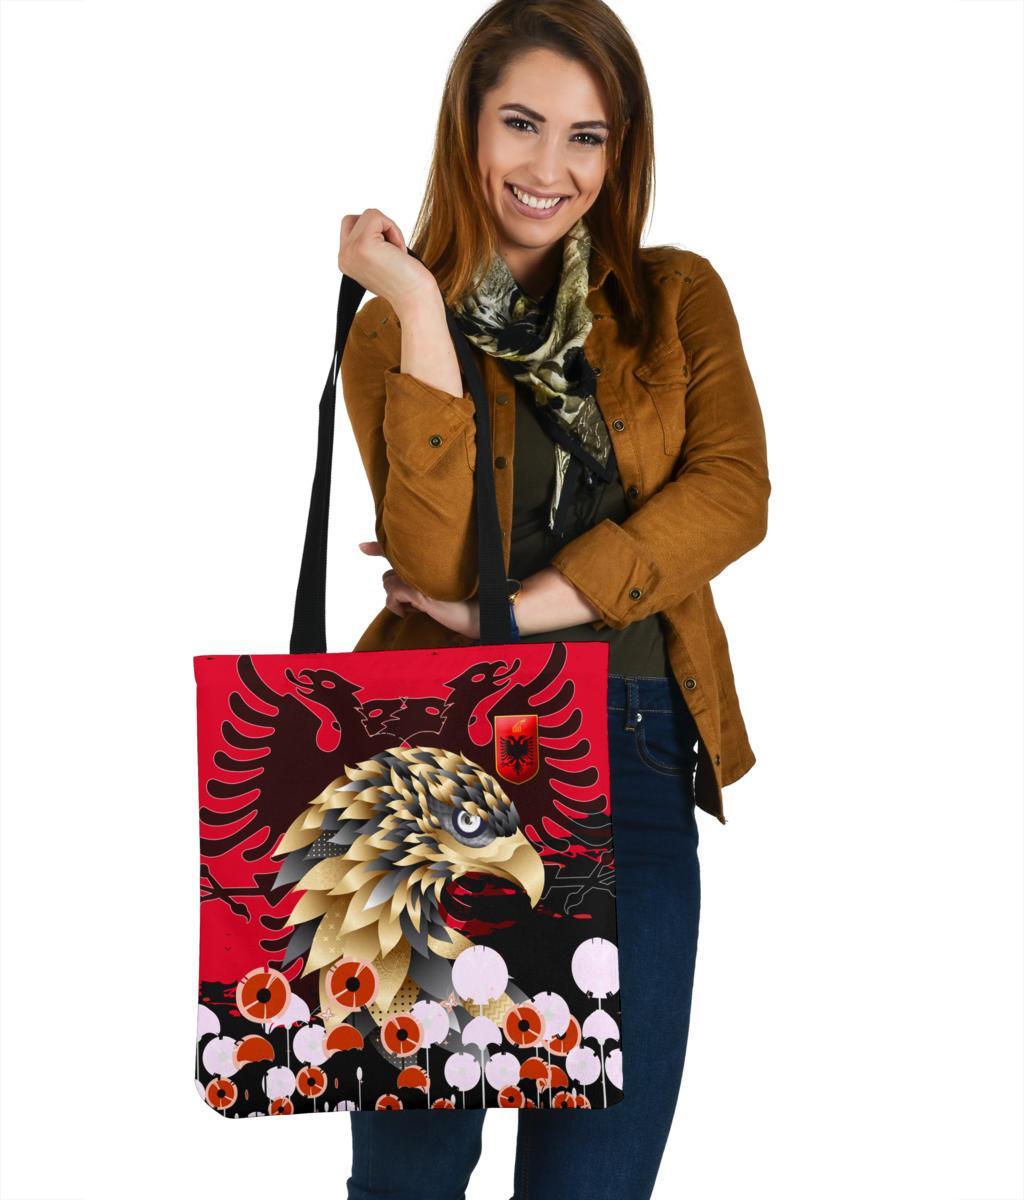 albania-golden-eagle-tote-bags-happy-flag-day